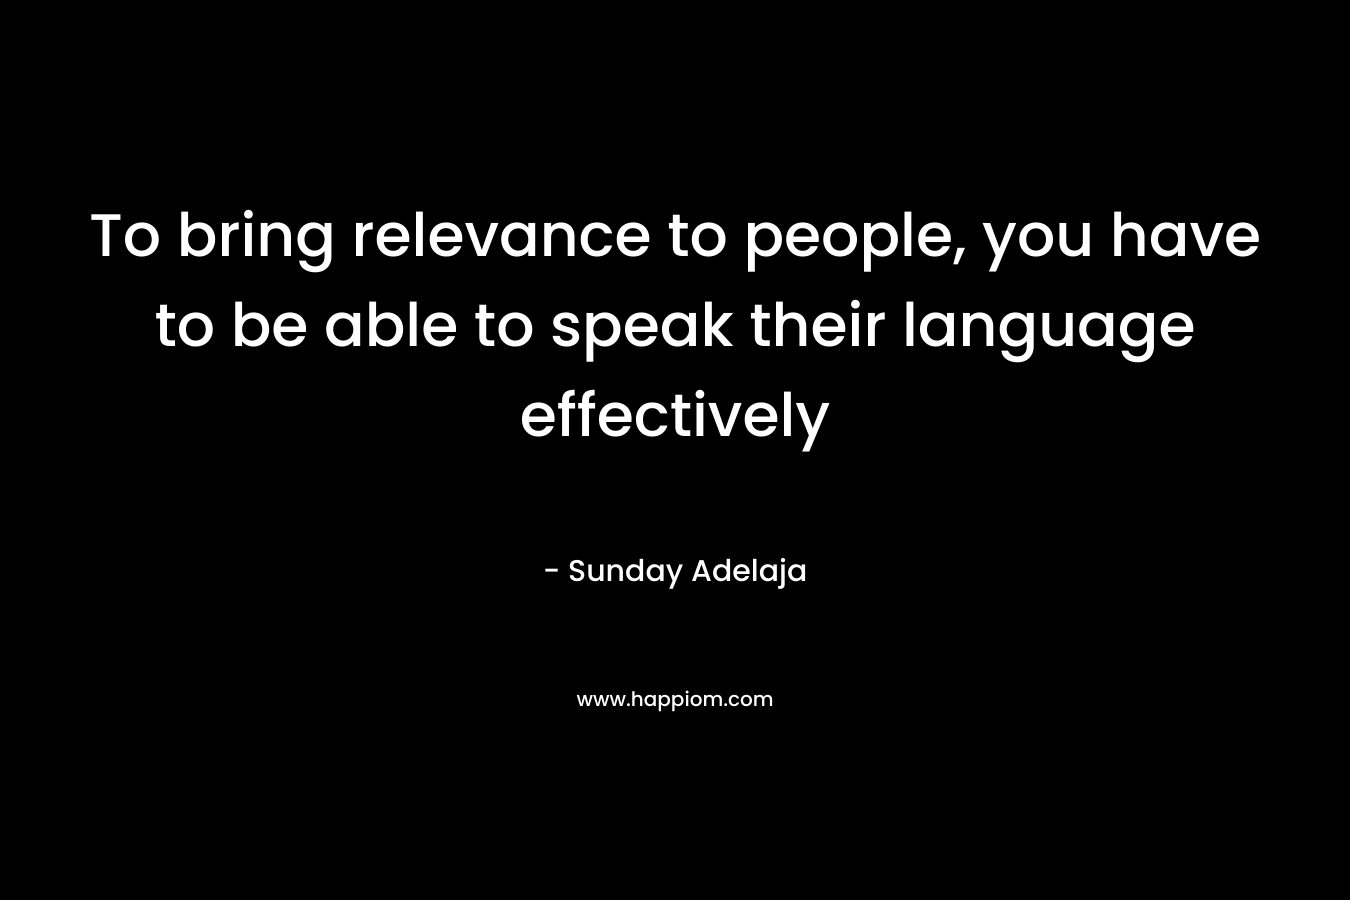 To bring relevance to people, you have to be able to speak their language effectively